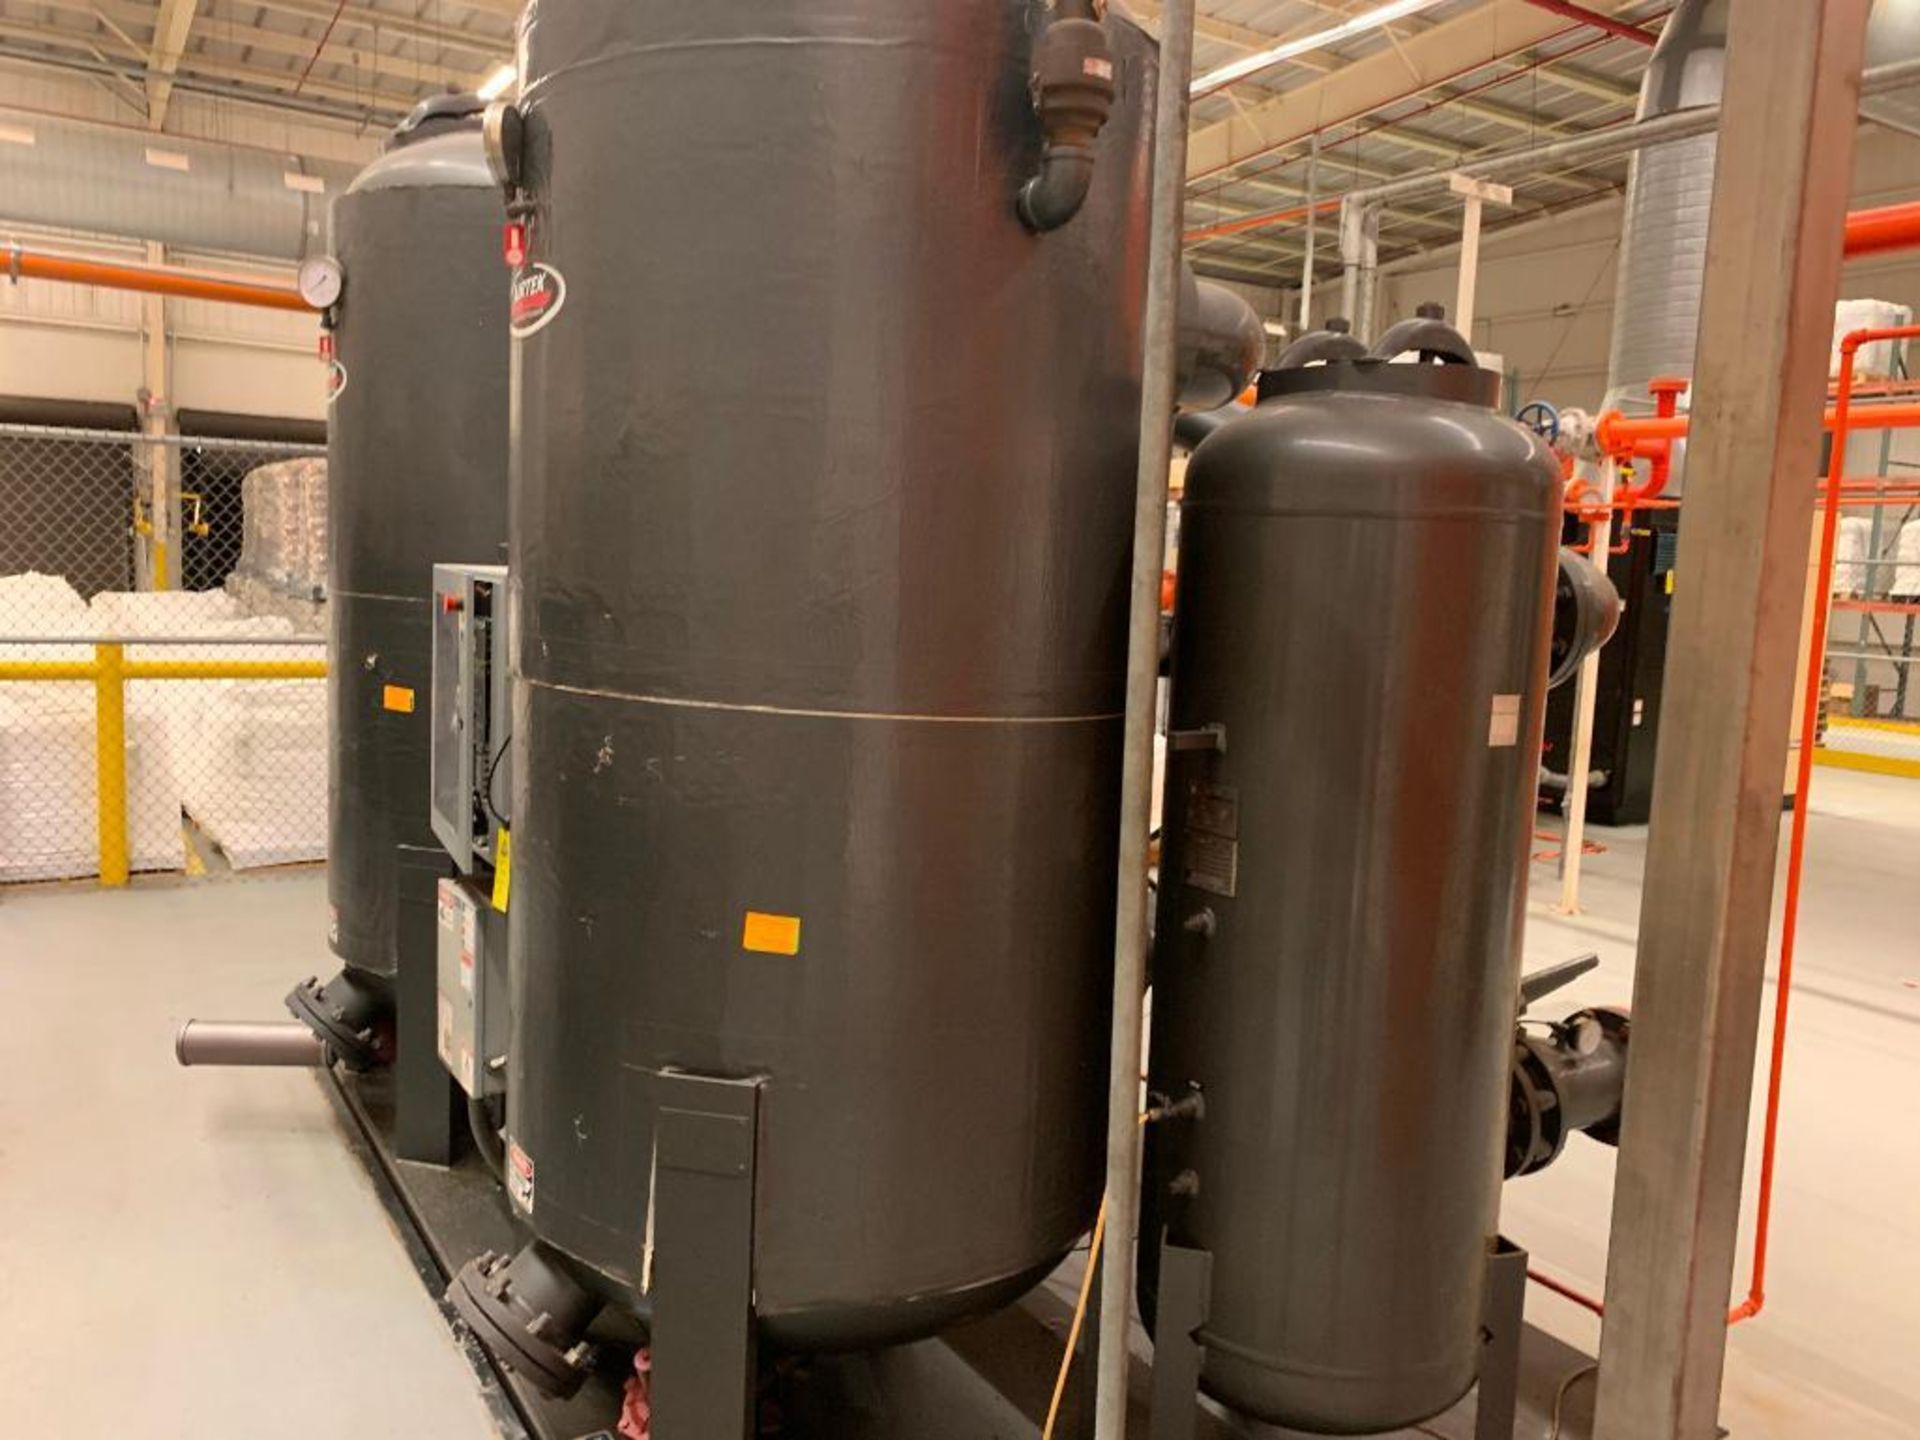 AirTek twin tower externally heated compressed air dryer - Located in Tifton, GA - Image 7 of 29